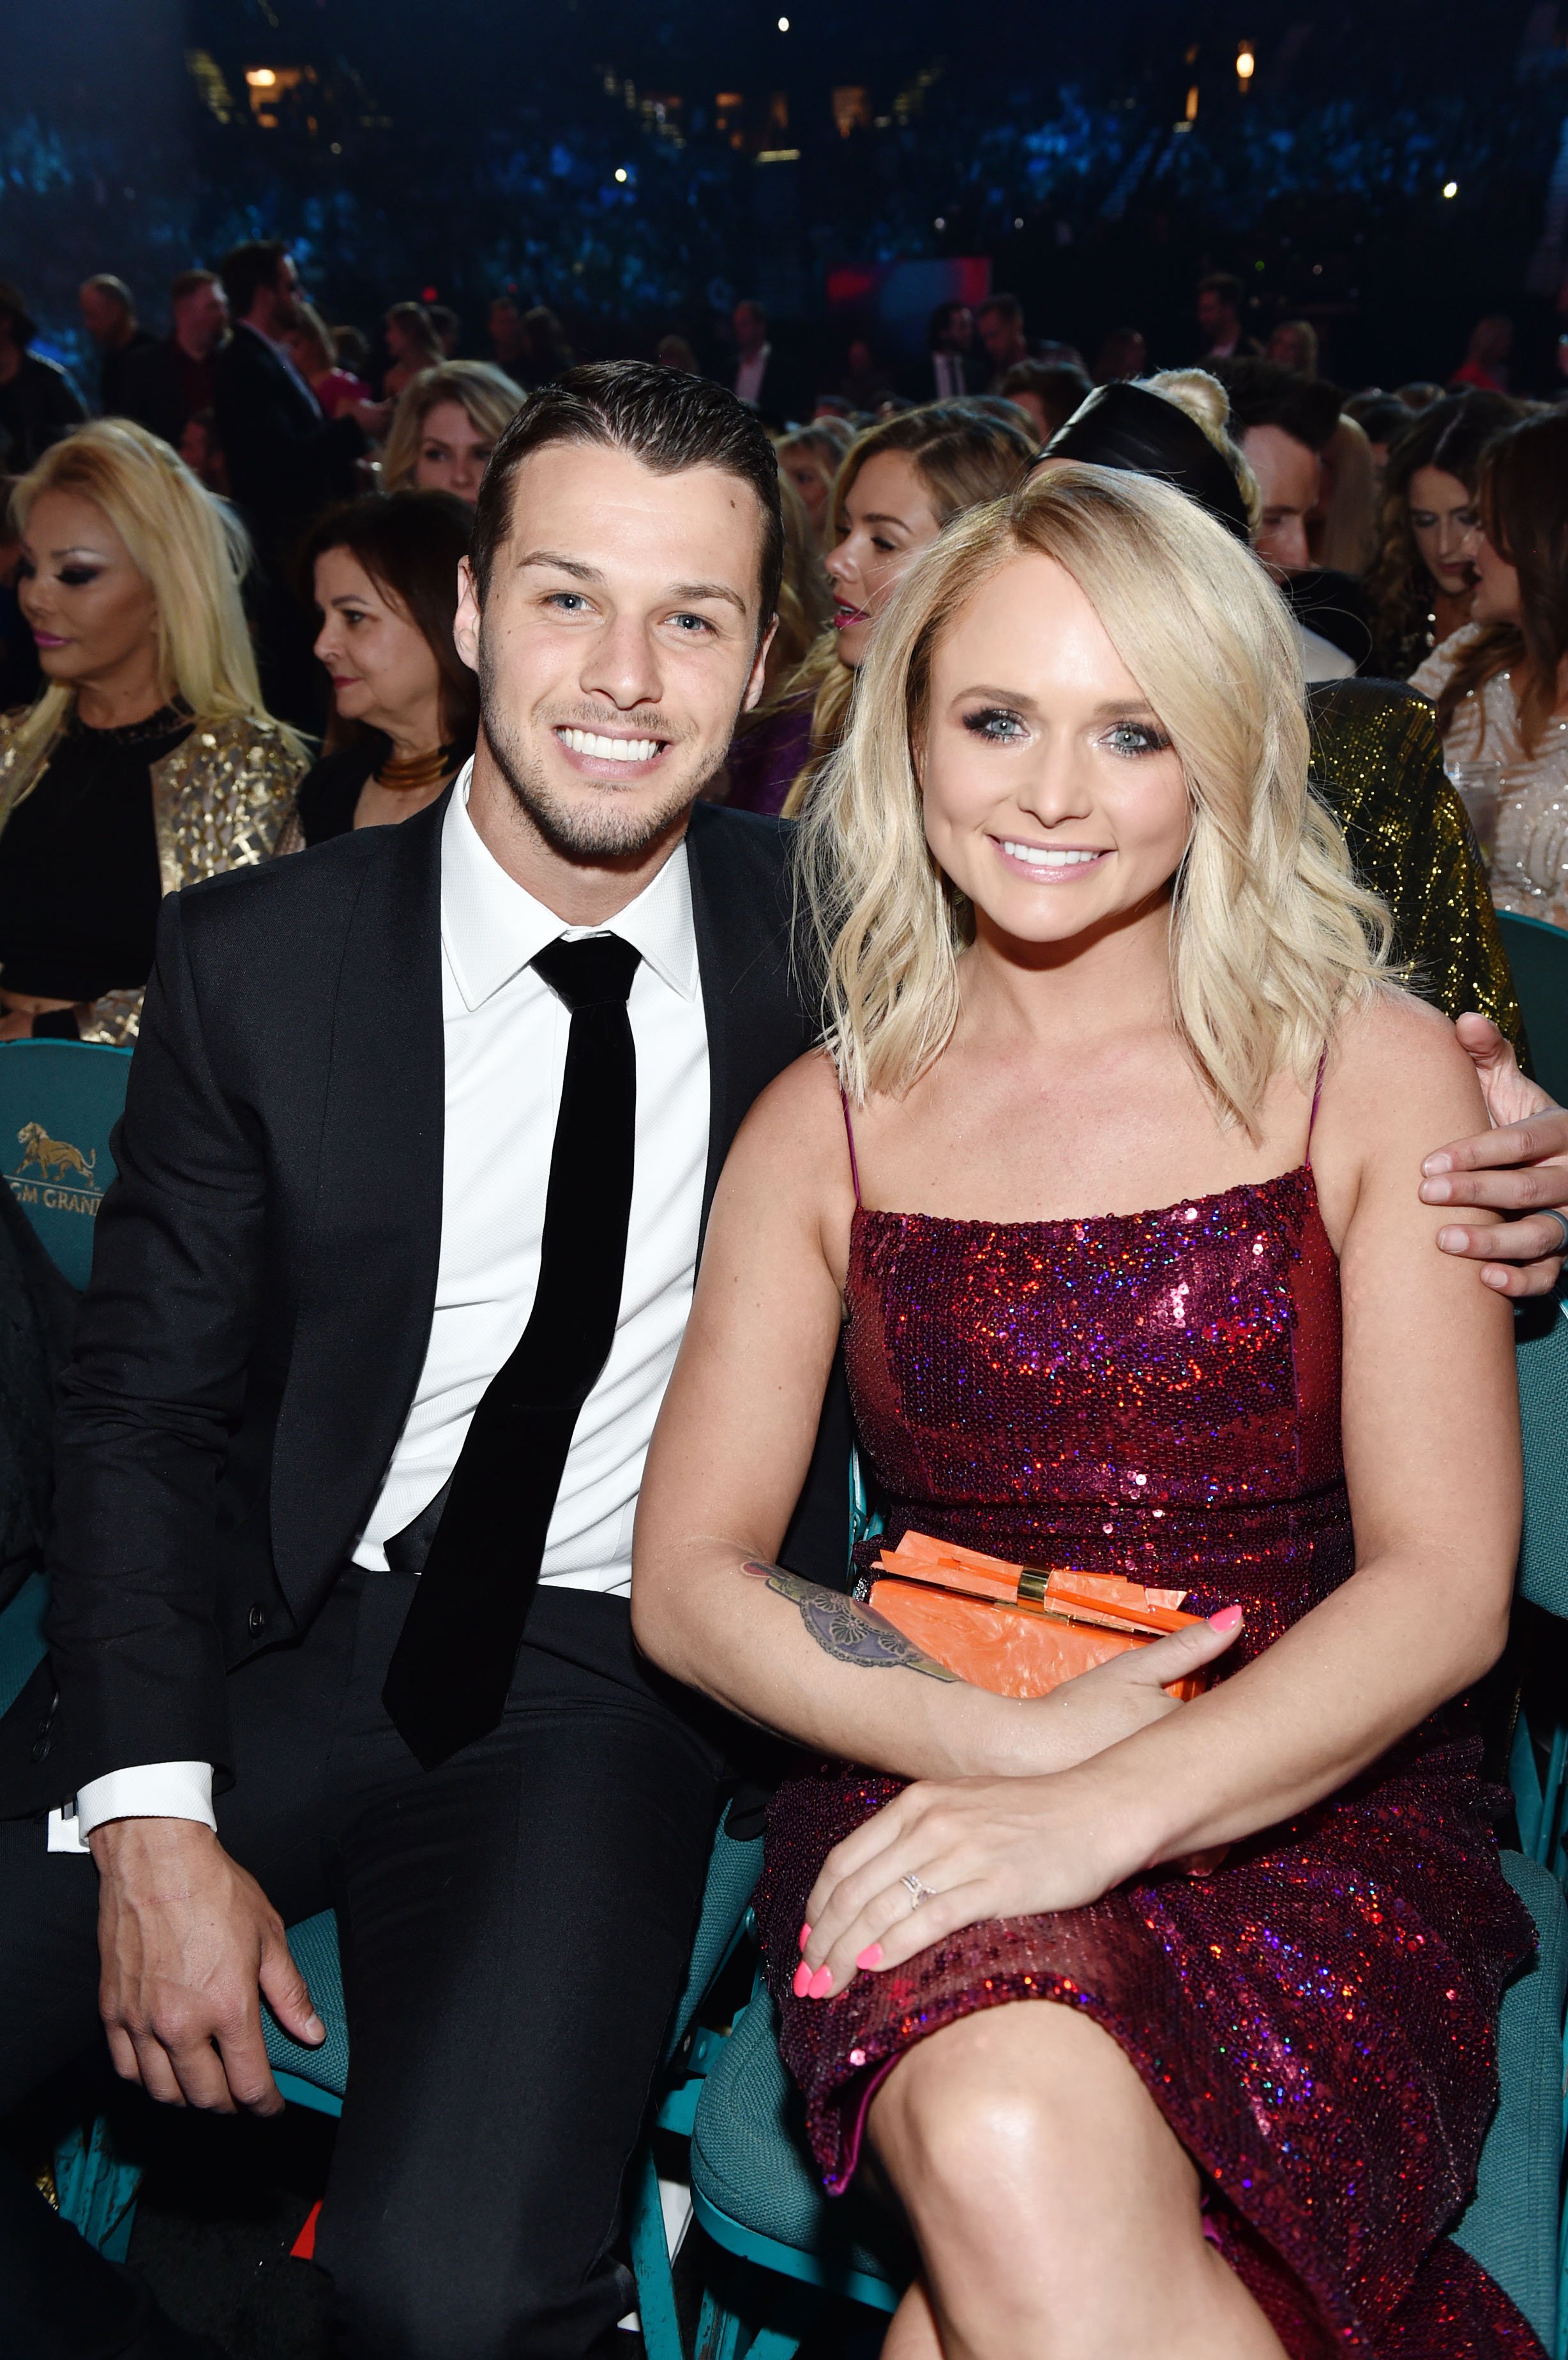 Brendan McLoughlin and Miranda Lambert attend the 54th Academy Of Country Music Awards at MGM Grand Garden Arena on April 07, 2019 in Las Vegas, Nevada | Photo: Getty Images